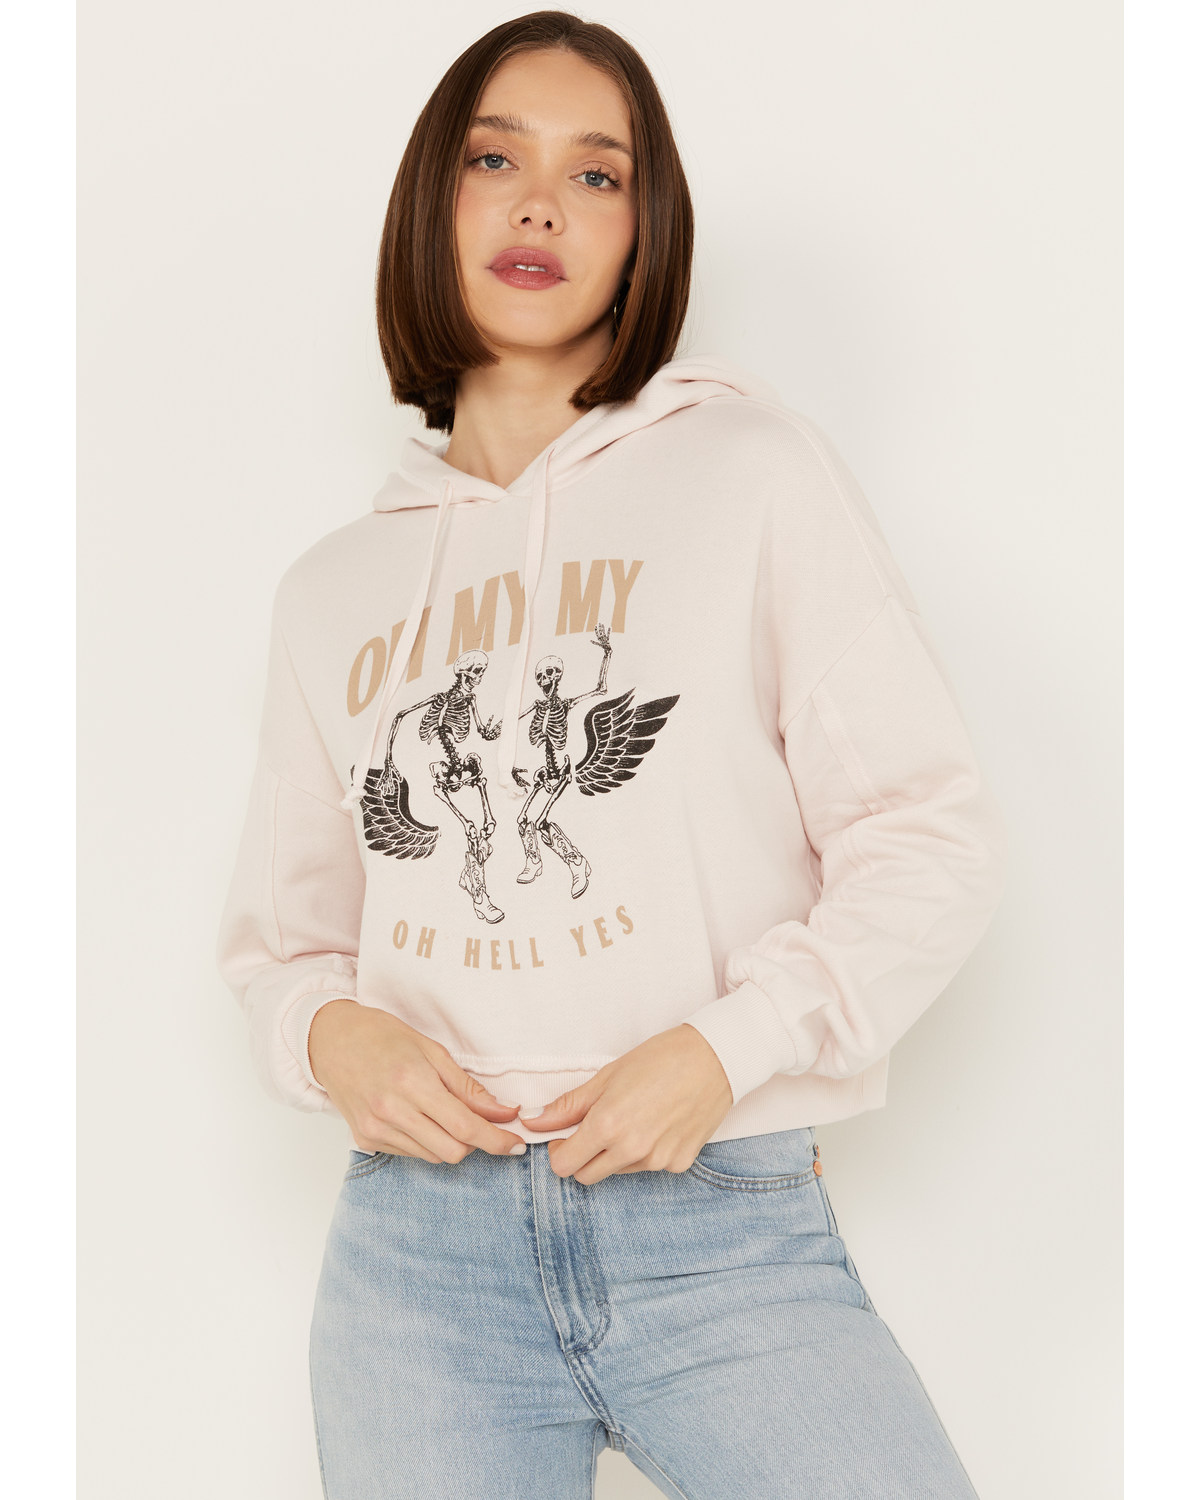 Cleo + Wolf Women's Oh My Cropped Hoodie